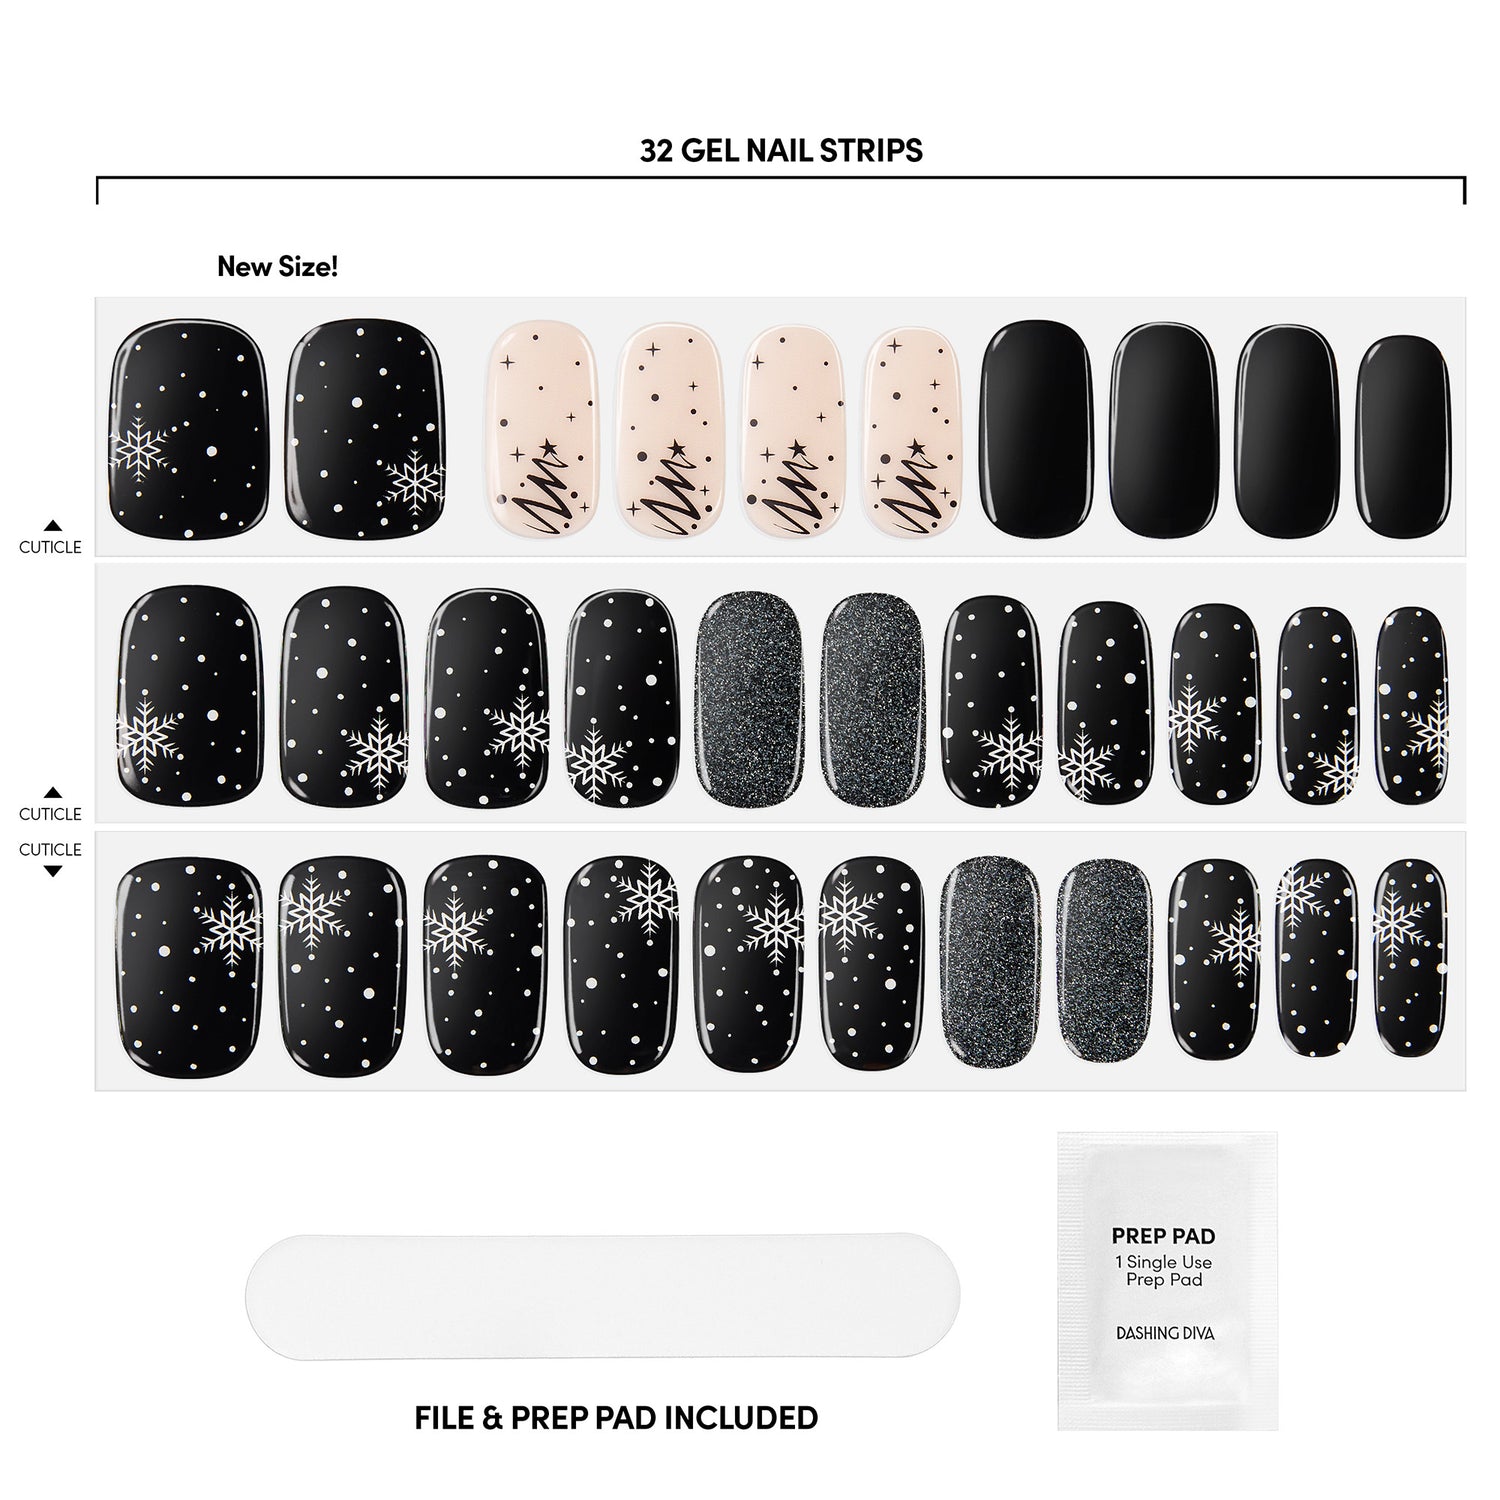 Solid black, glittered black, and sheer nude gel nail strips featuring snowflake icons and abstact Christmas tree accents with a double gel formula for an ultra-smooth finish.